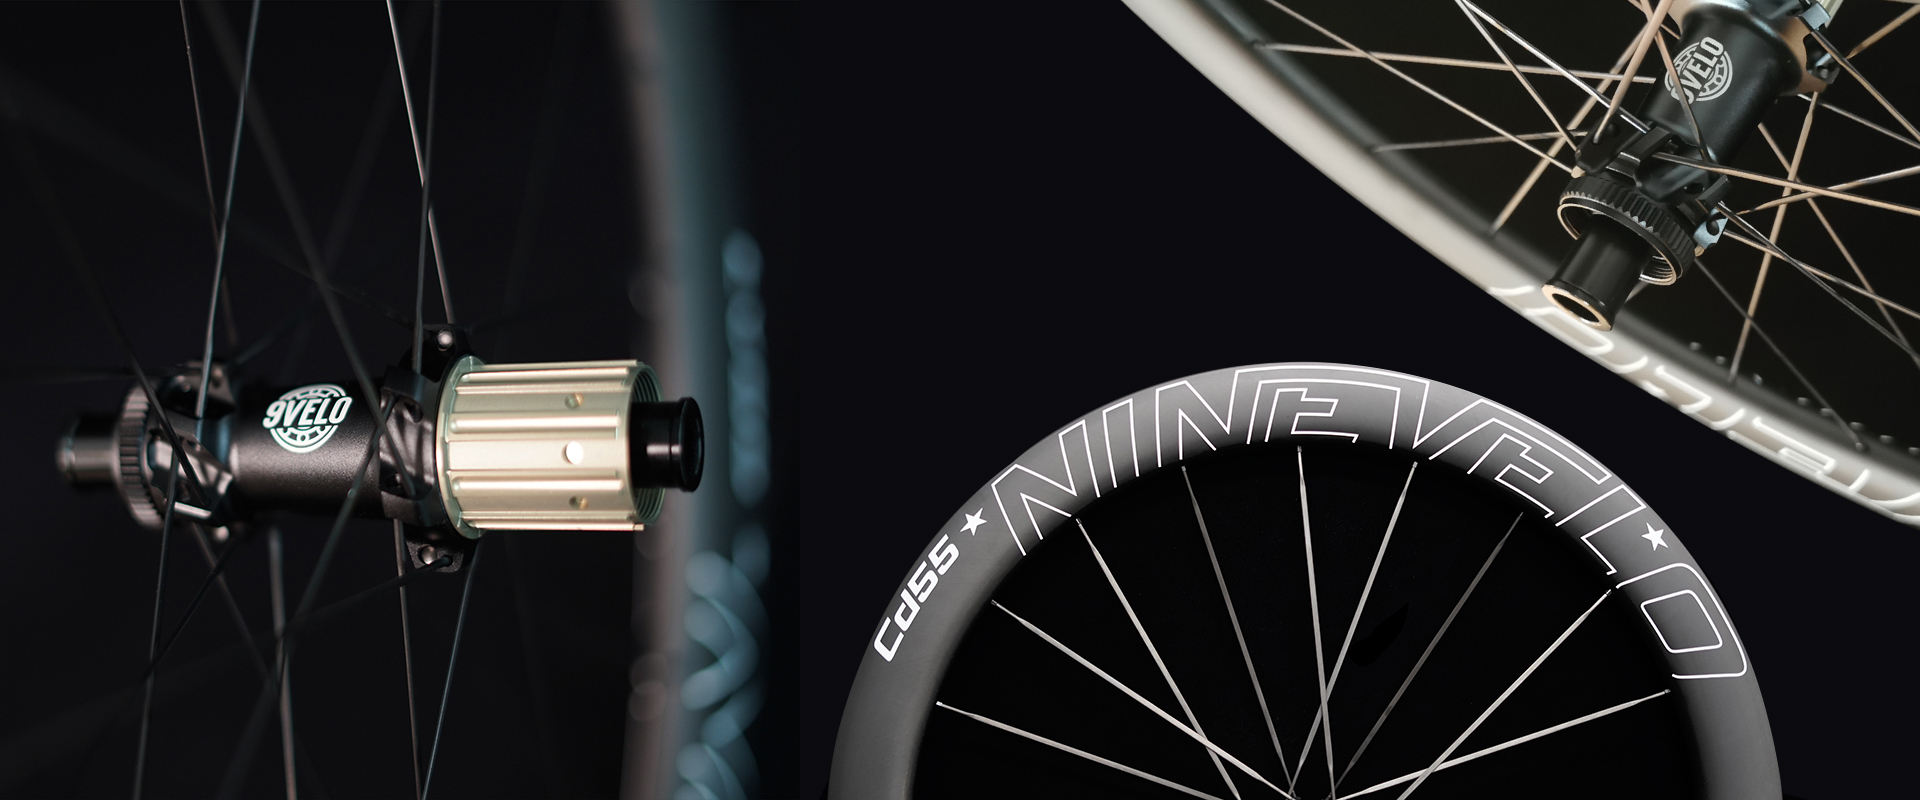 The World's Most Competitive Wheelset